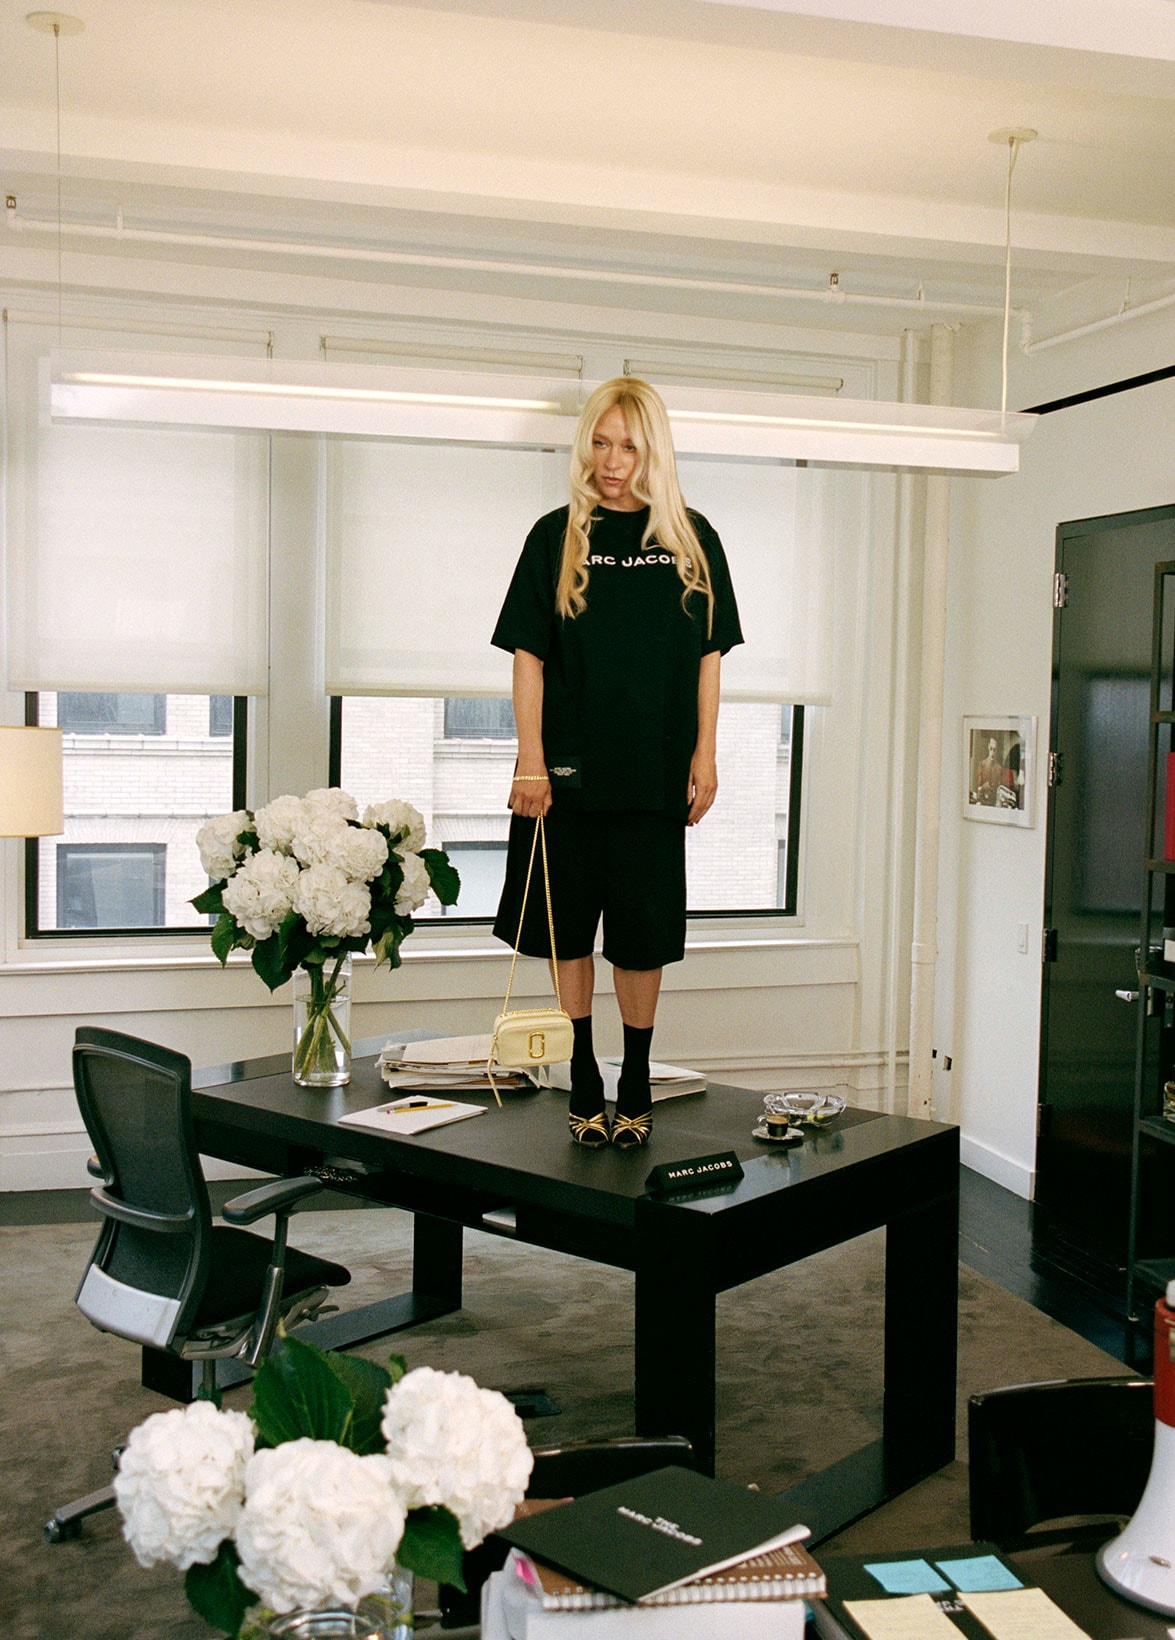 Marc Jacobs Chloë Sevigny Resort Campaign NYC Headquarters Office Desk Standing